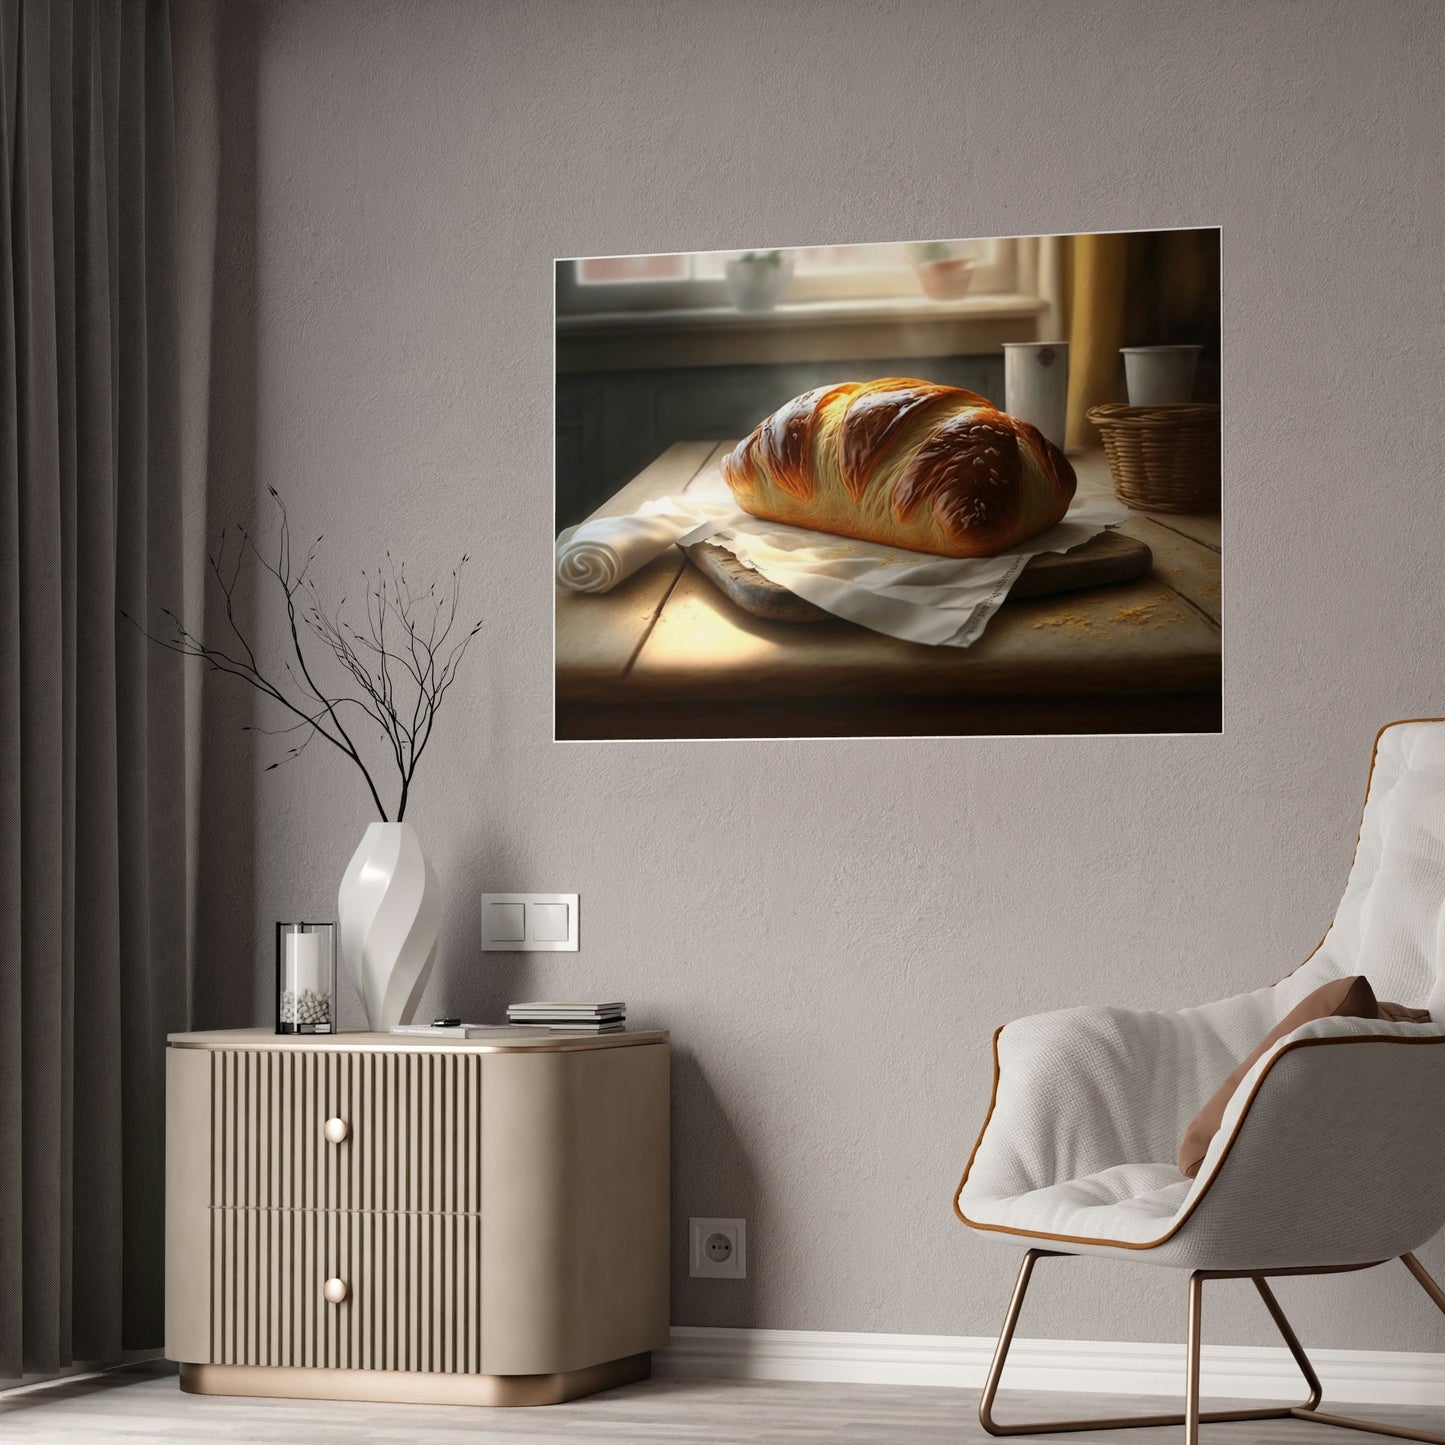 Fresh Bread Vibes: Art and Canvas Print for Home and Kitchen Decoration